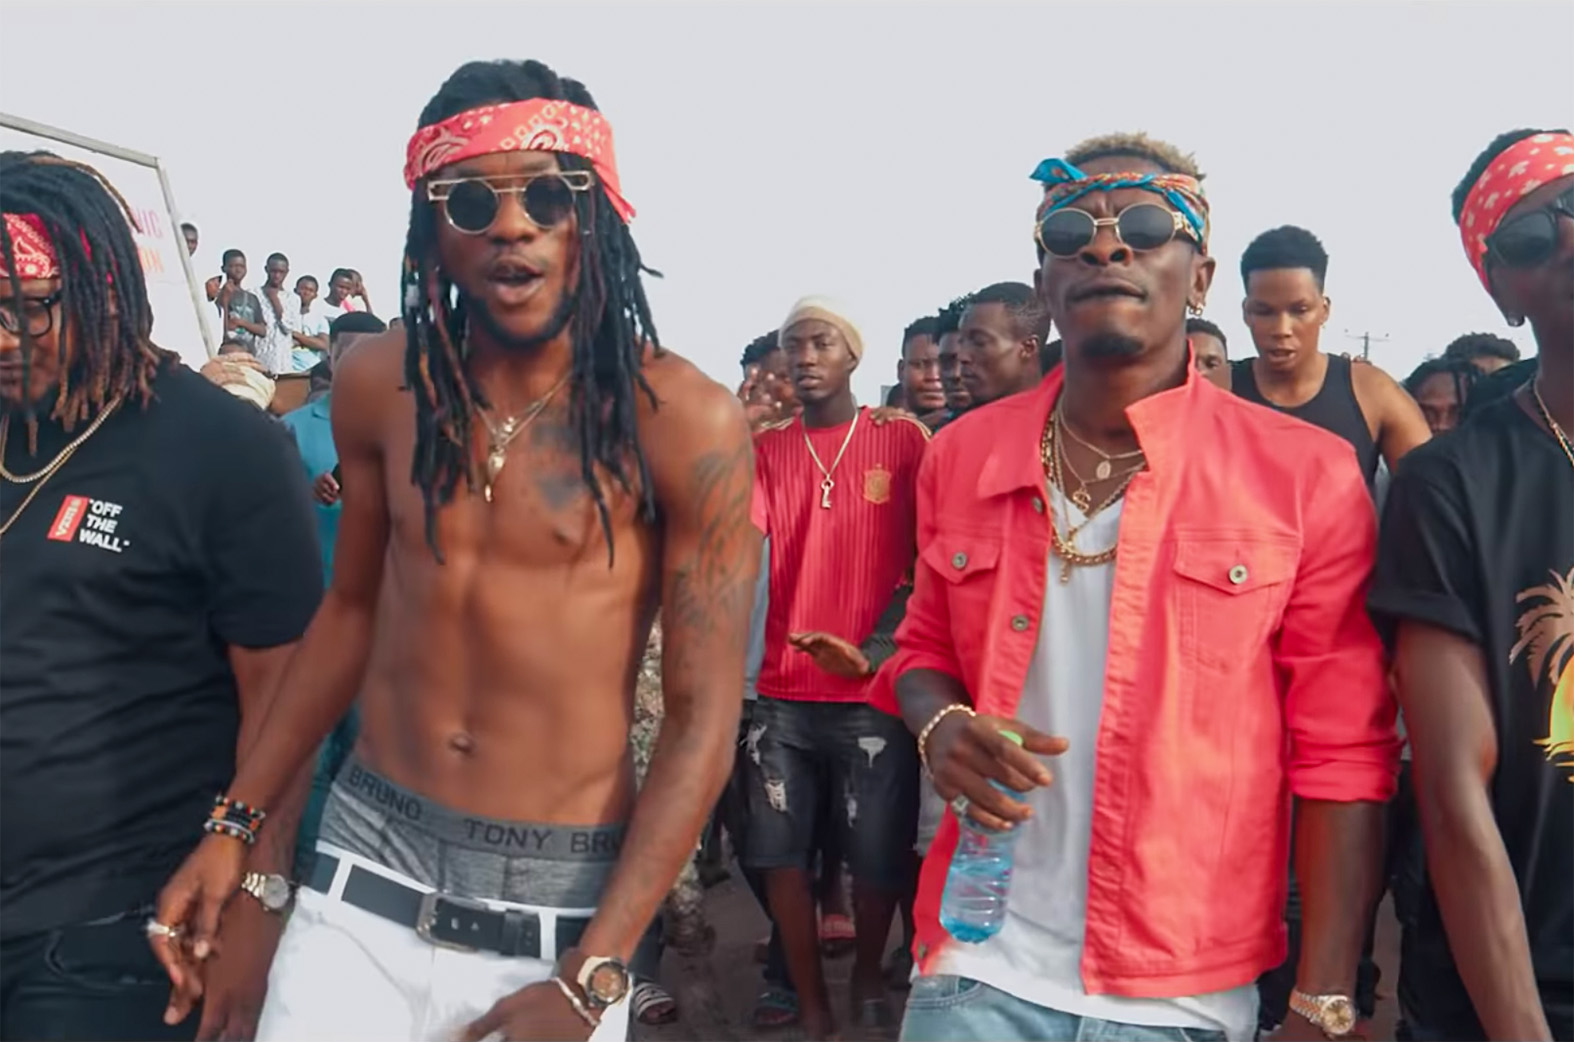 Video Premiere: Thunder Fire by Shatta Wale feat. SM Militants